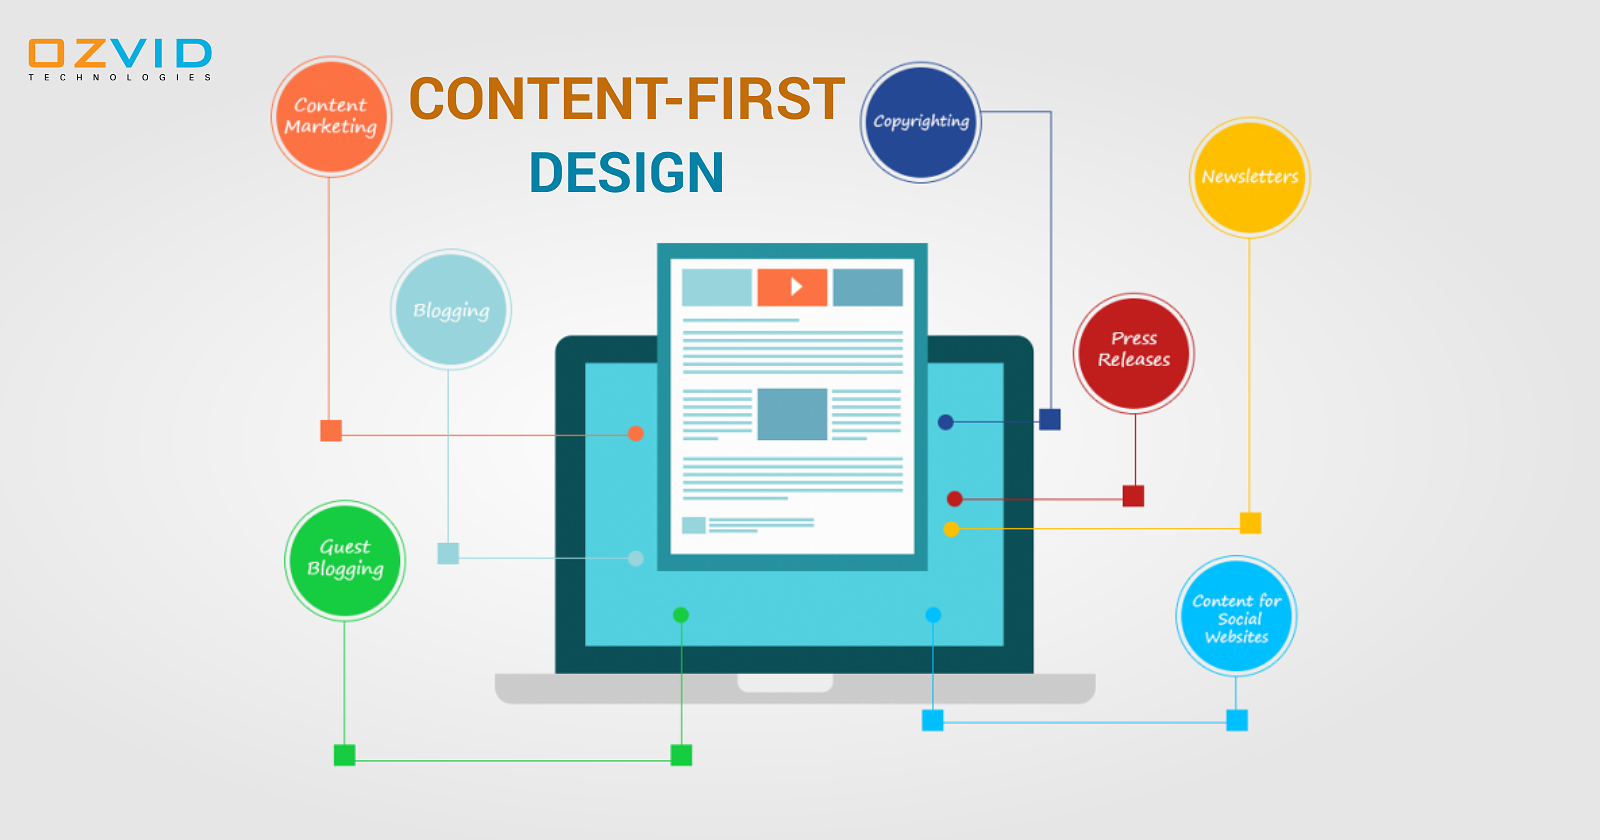 Implementing the "Content-First Design" Effectively in Websites